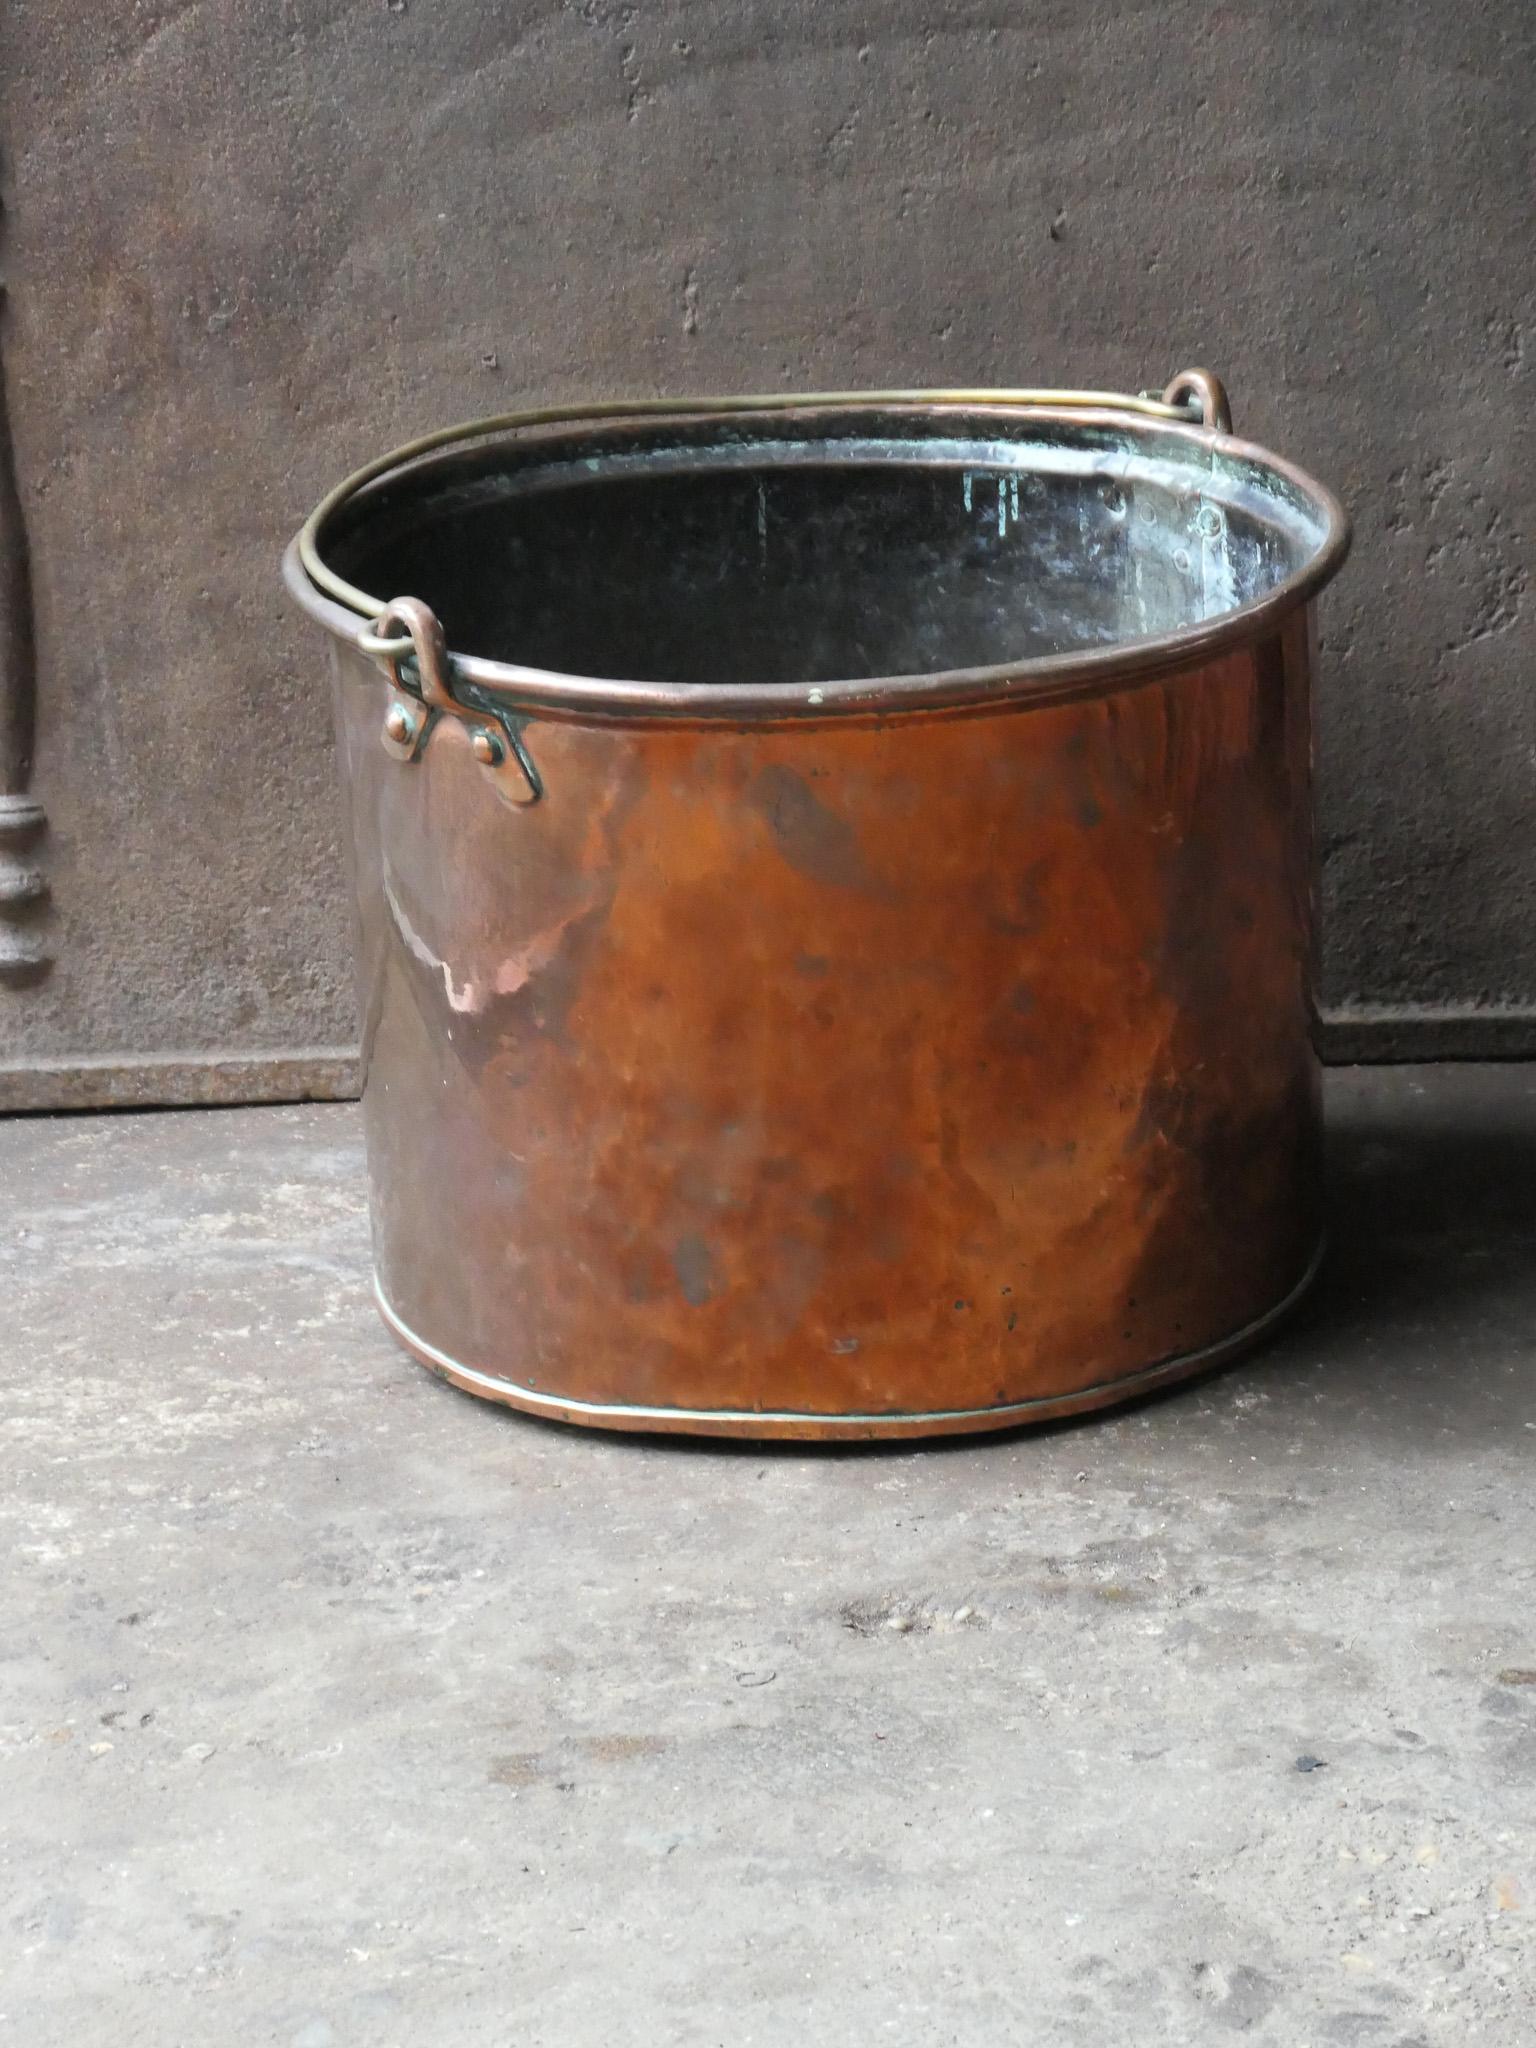 18th - 19th Century Dutch neoclassical log basket. The firewood basket is made of  copper and has a brass handle. Also called 'Frisian nail bucket'. Was used for the transportation of milk.

The log holder is in a good condition and is fully